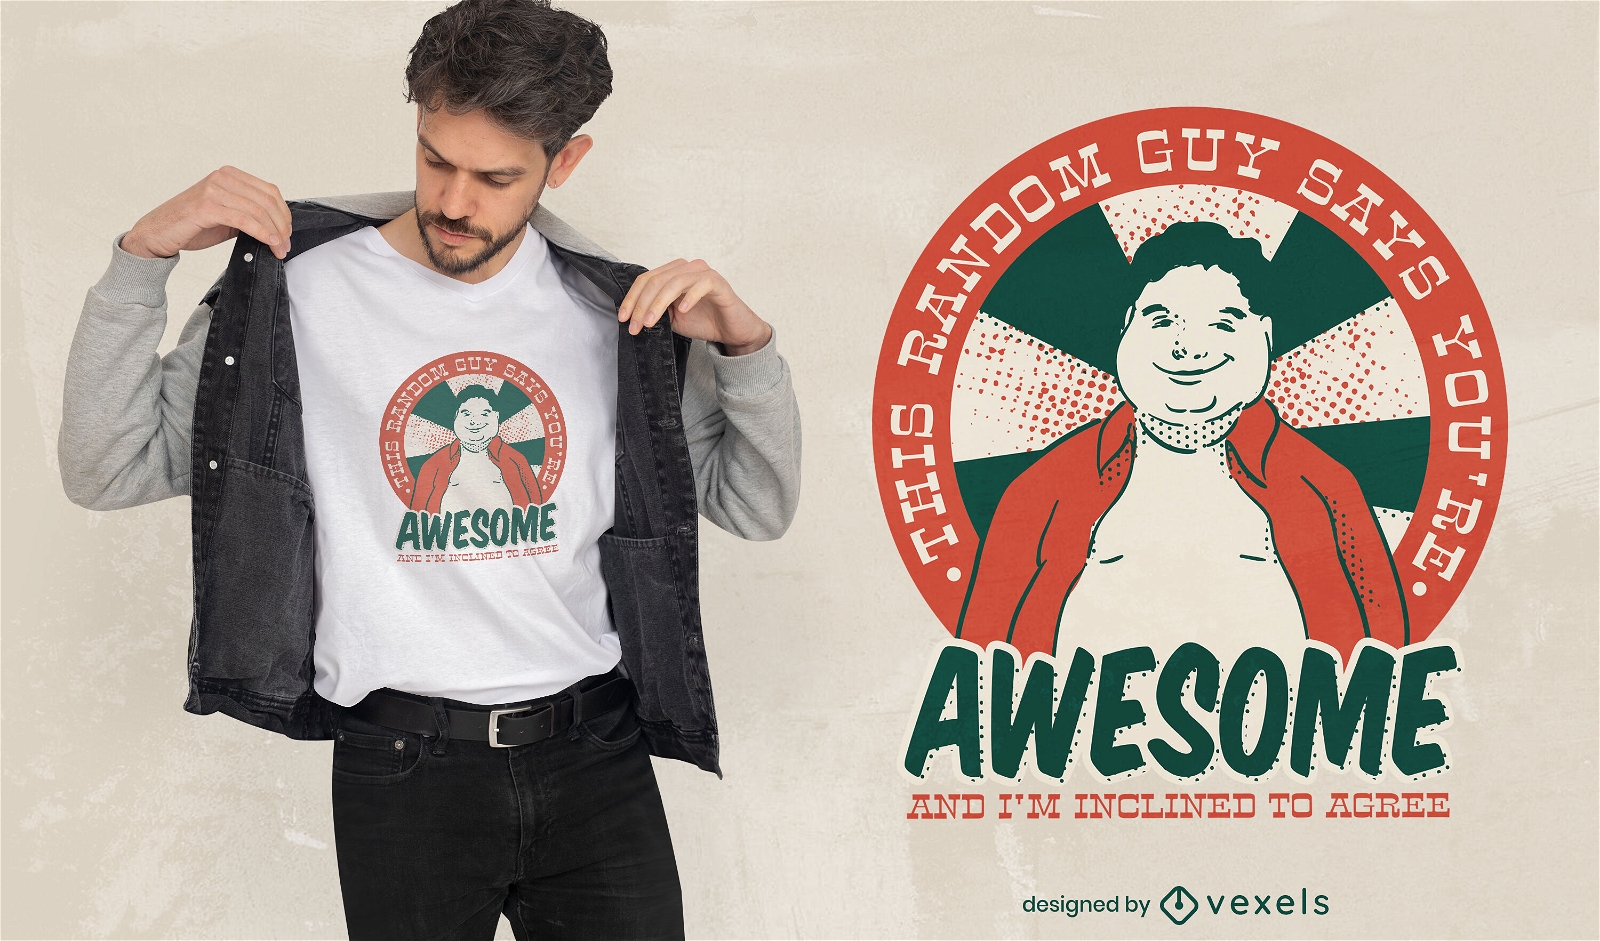 You're awesome friendly t-shirt design